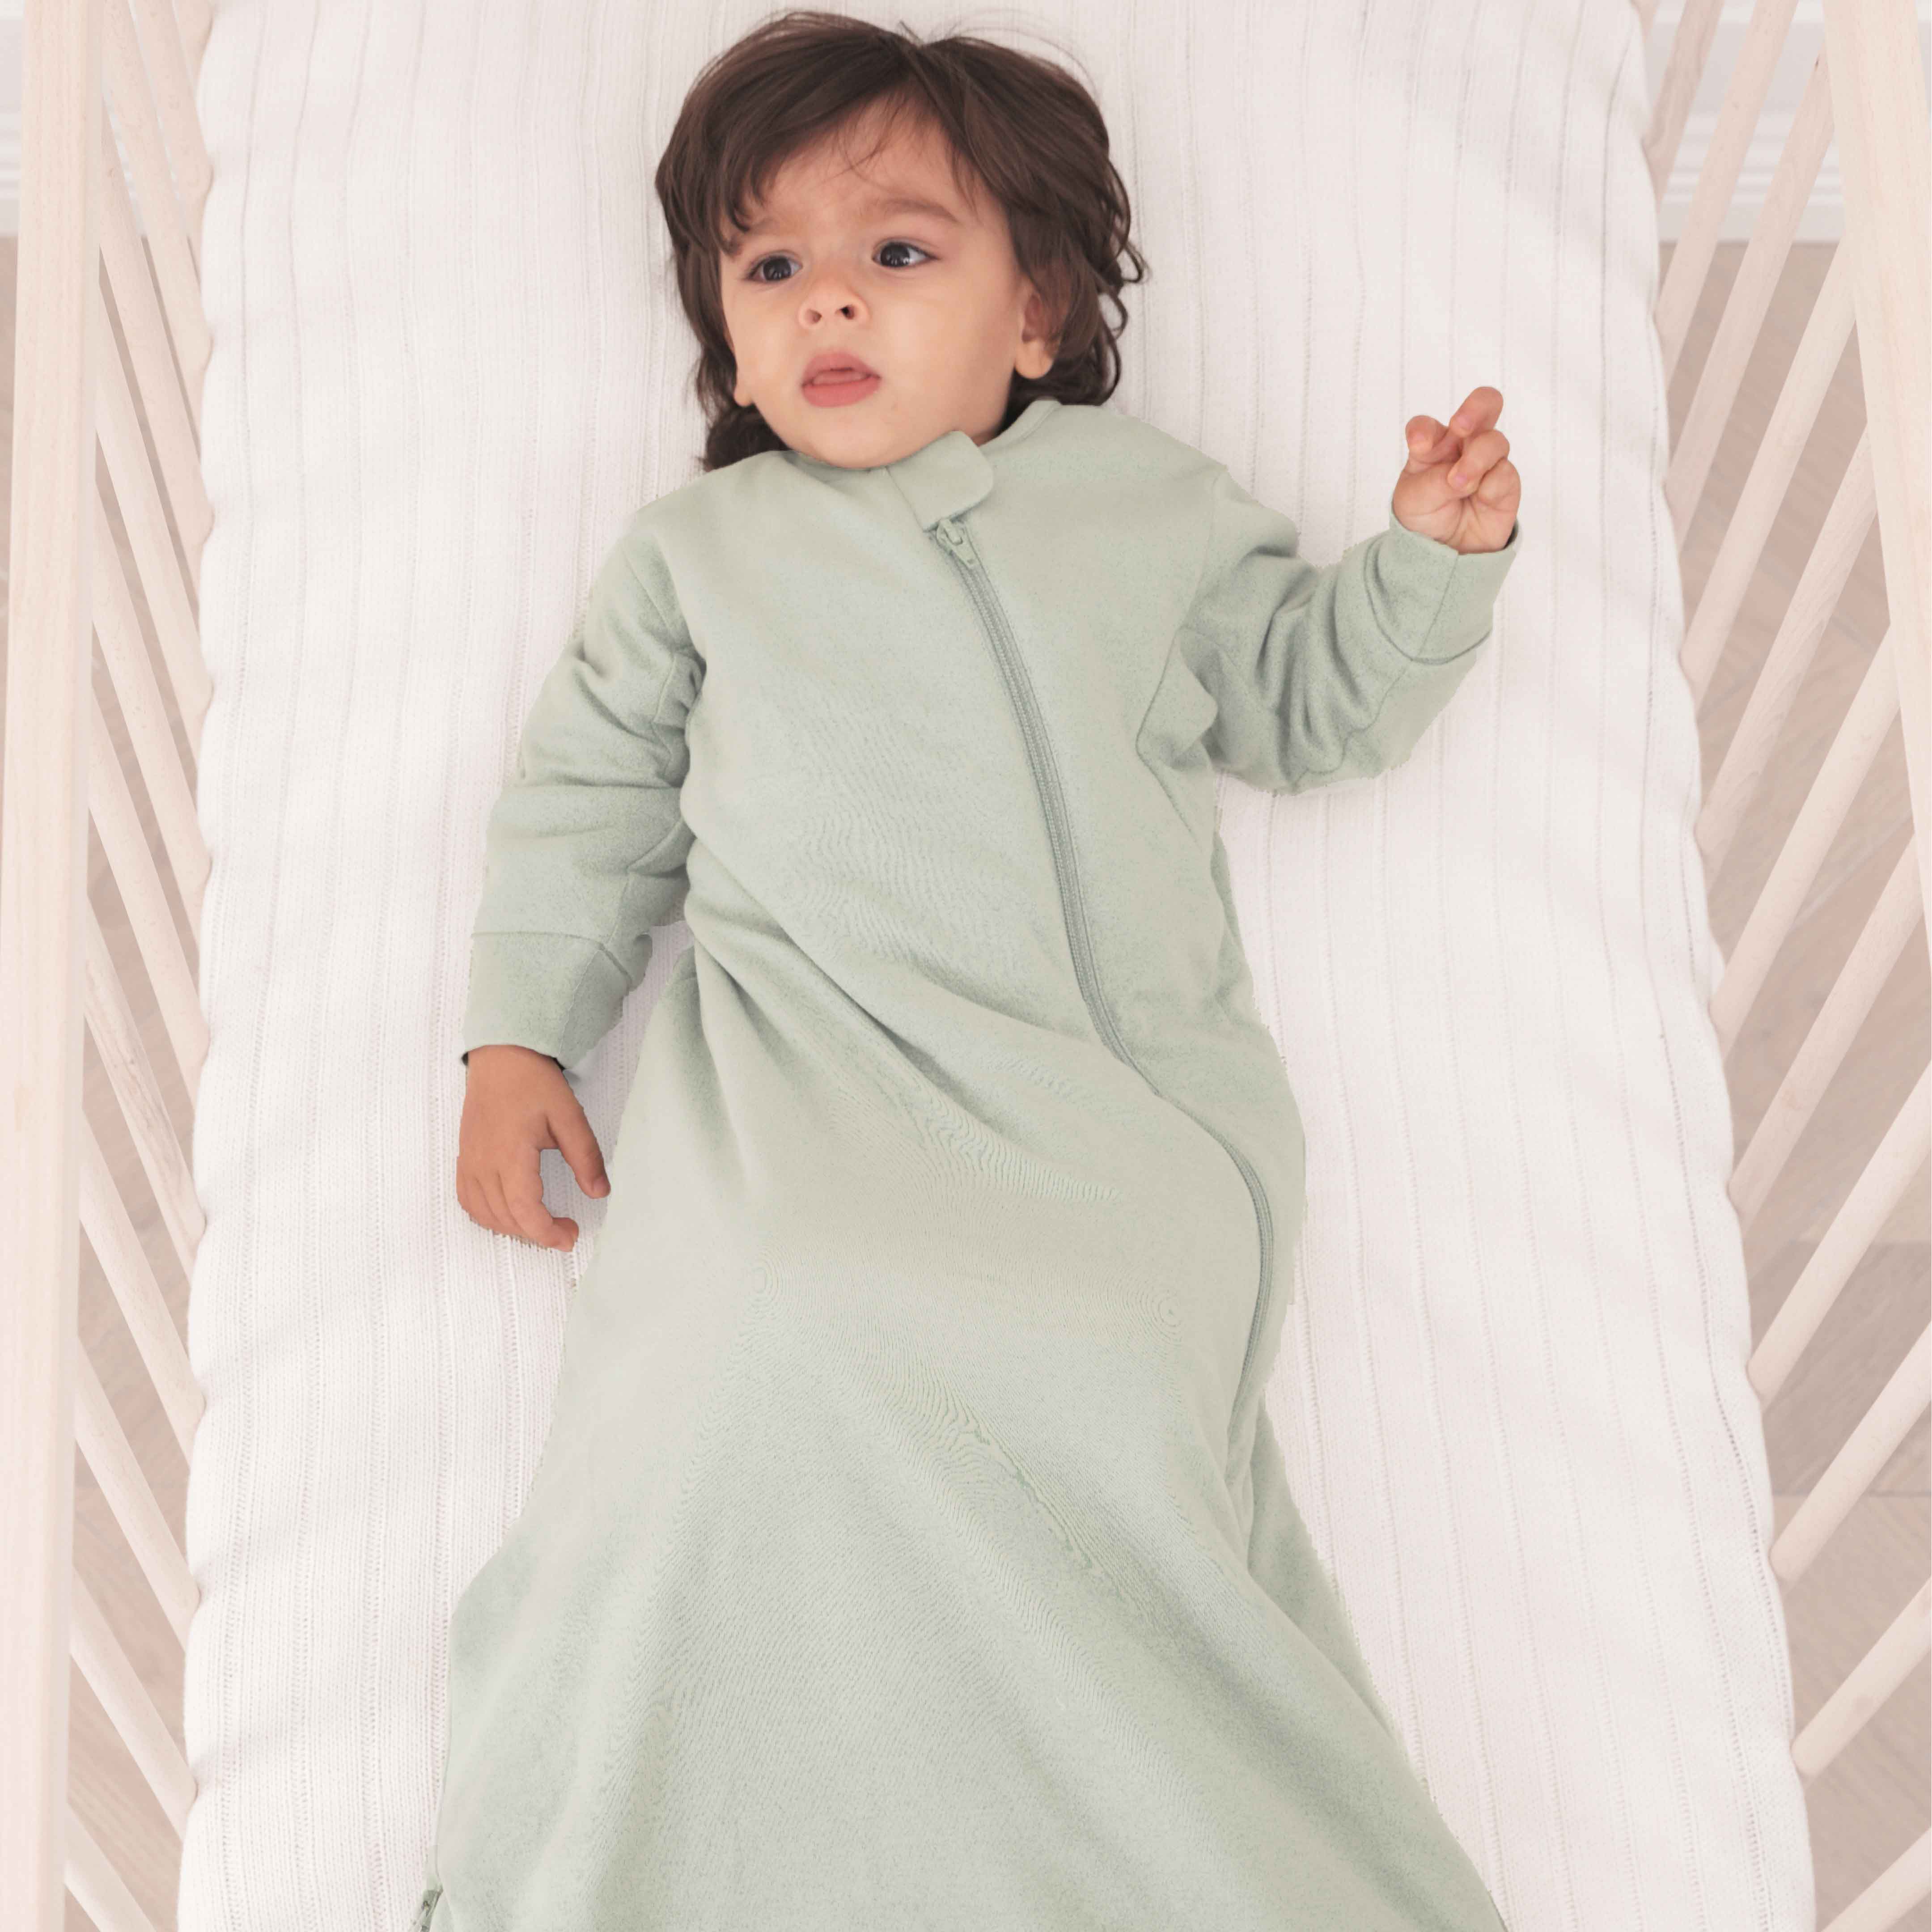 Camel Wool Winter Sleep Sack With Arms 3.5 TOG - Pea Green